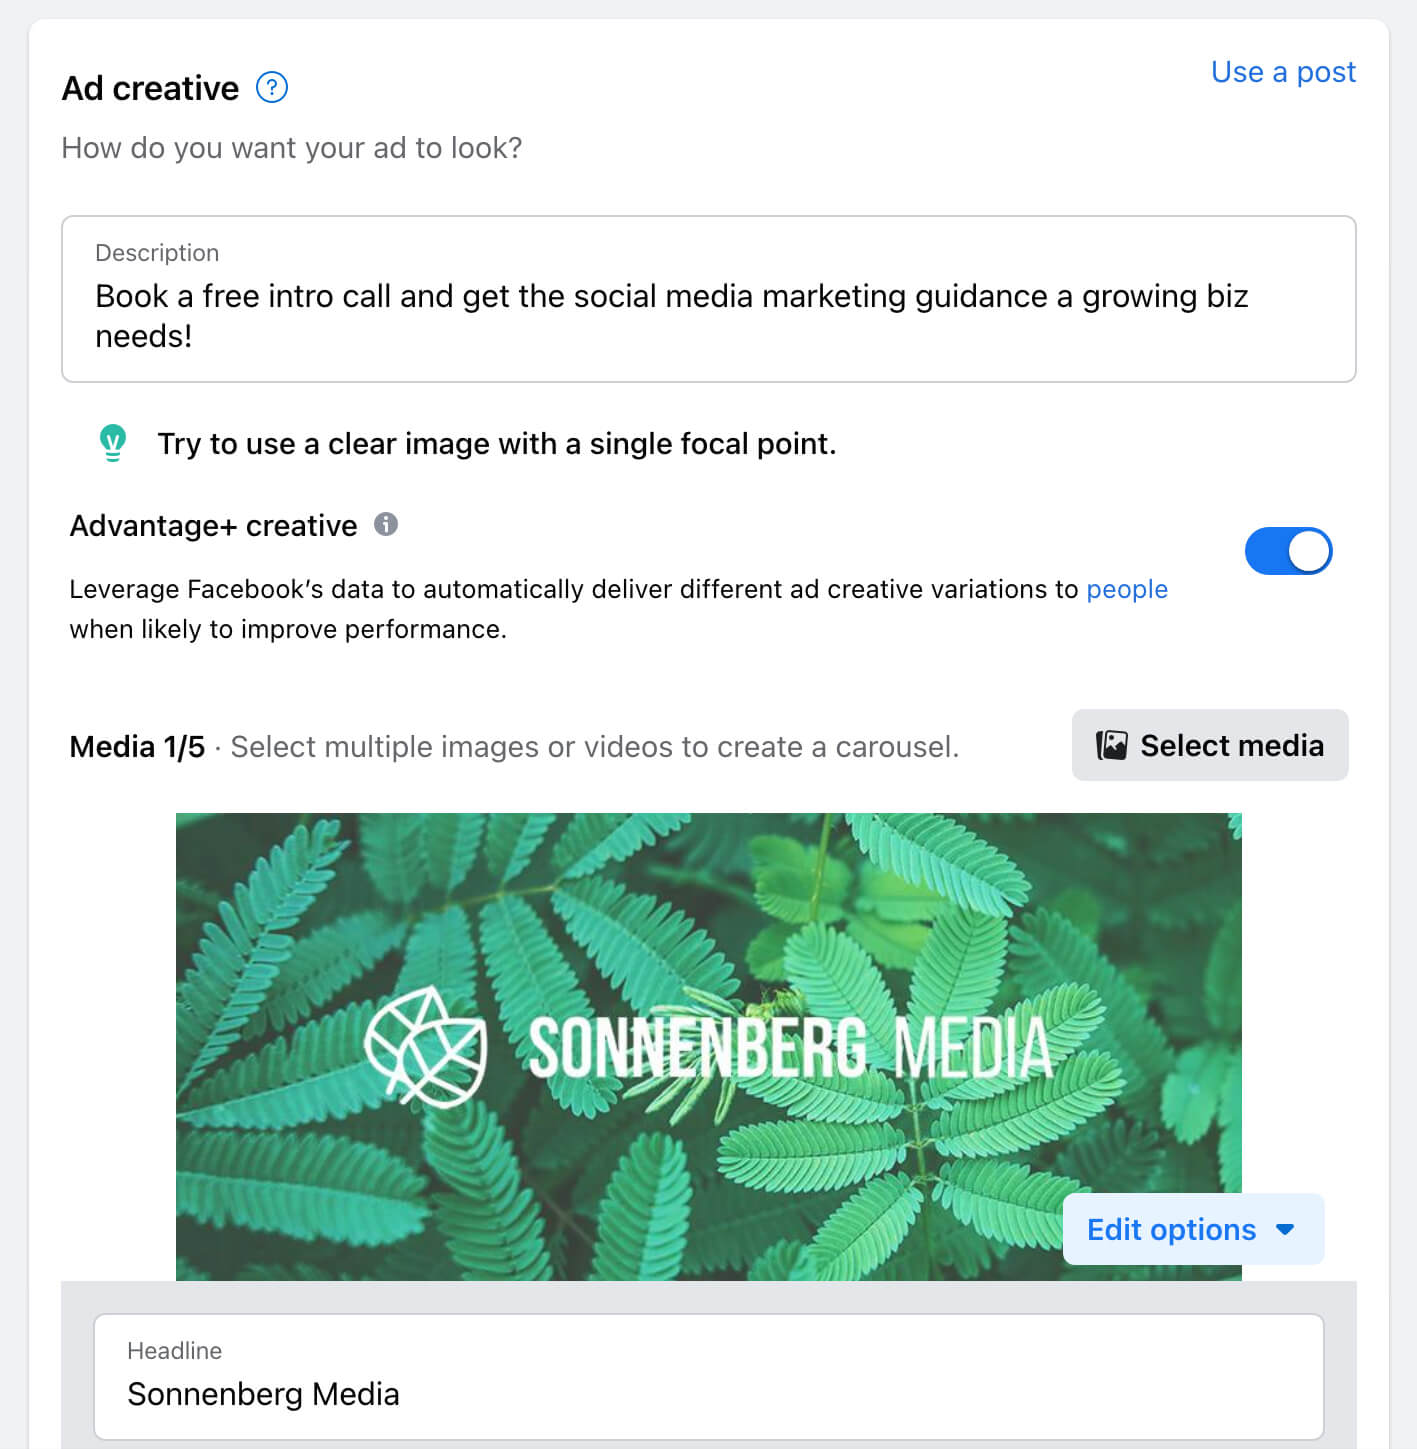 how-to-promote-your-book-now-or-reserve-action-buttons-with-paid-facebook-campaigns-add-creatives-build-carousel-leverage-advantage-plus-creative-sonnenbergmedia-example-26